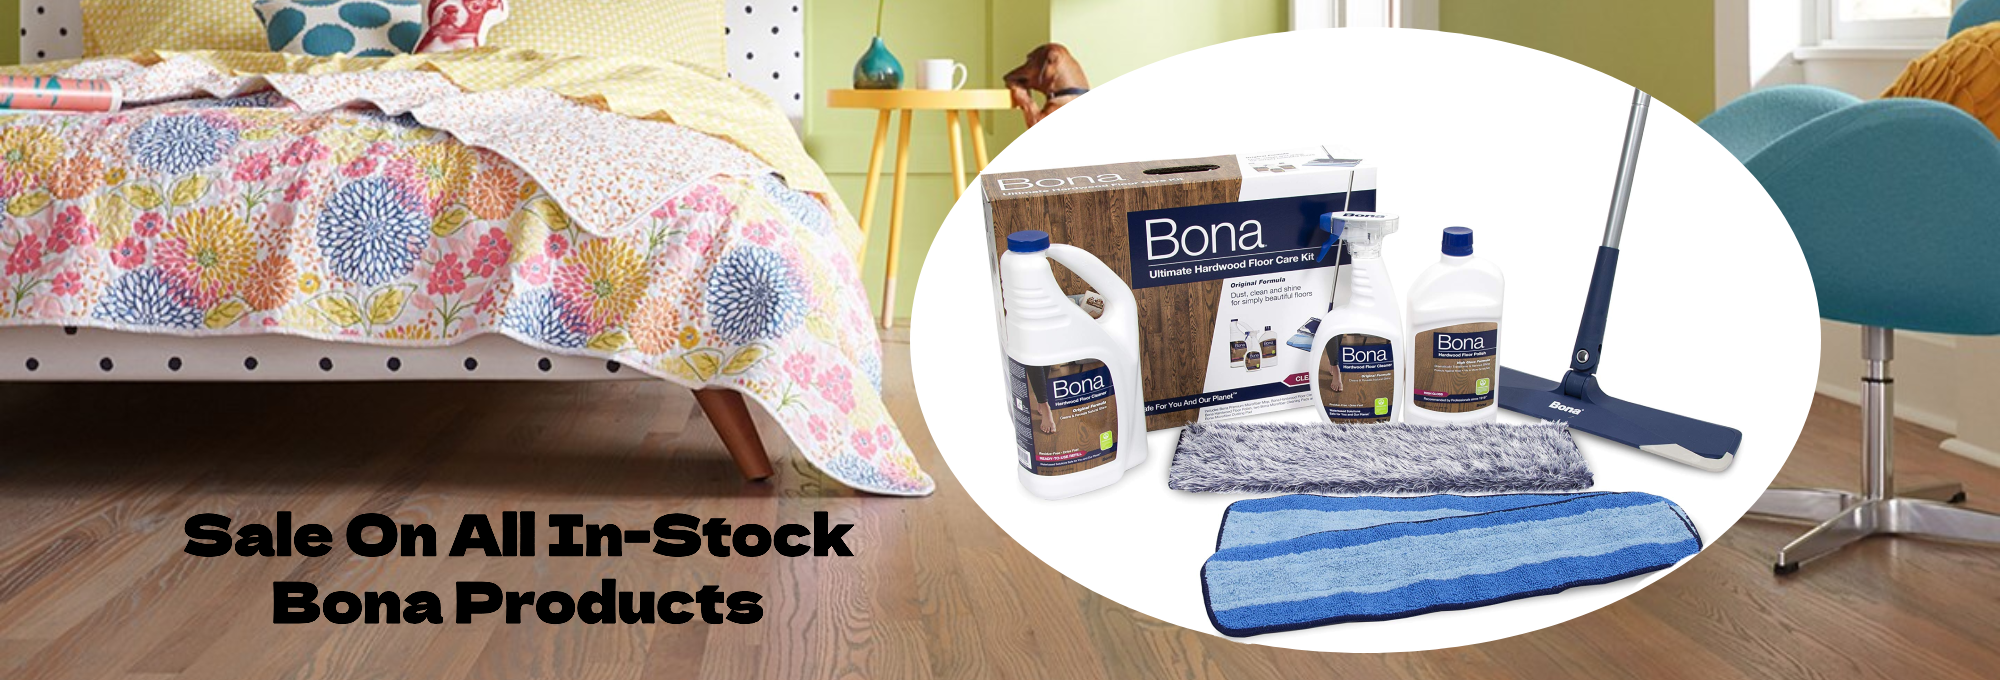 Bona-Products-In-Stock-Sale